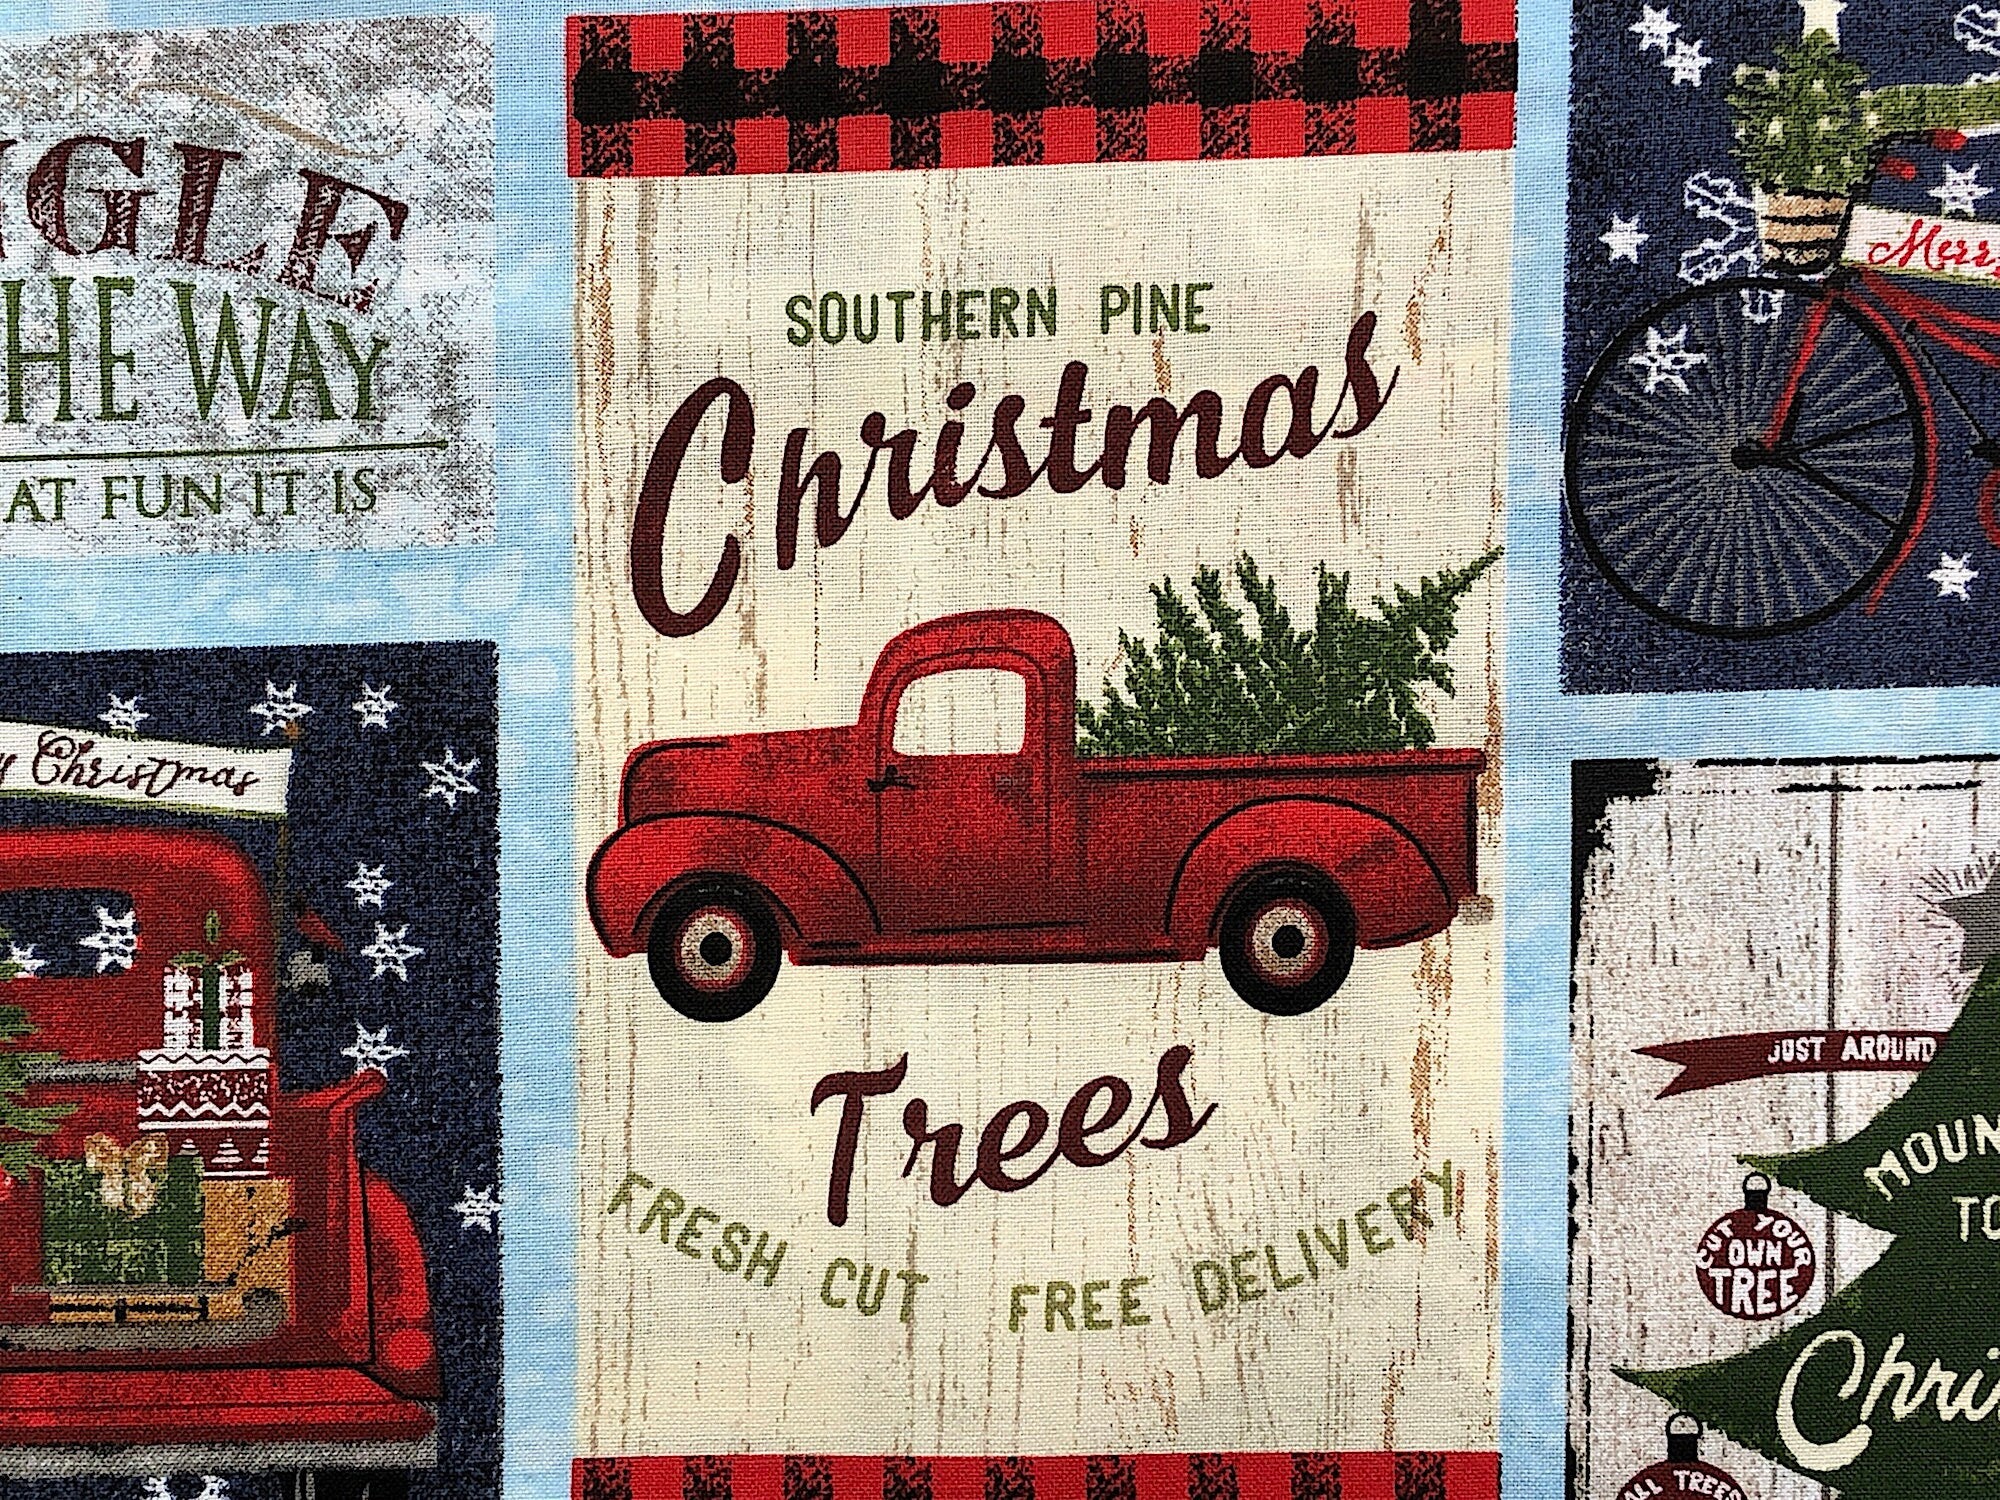 Close up of a red truck with a tree in the back and the words southern pine, Christmas Trees fresh cut free delivery.